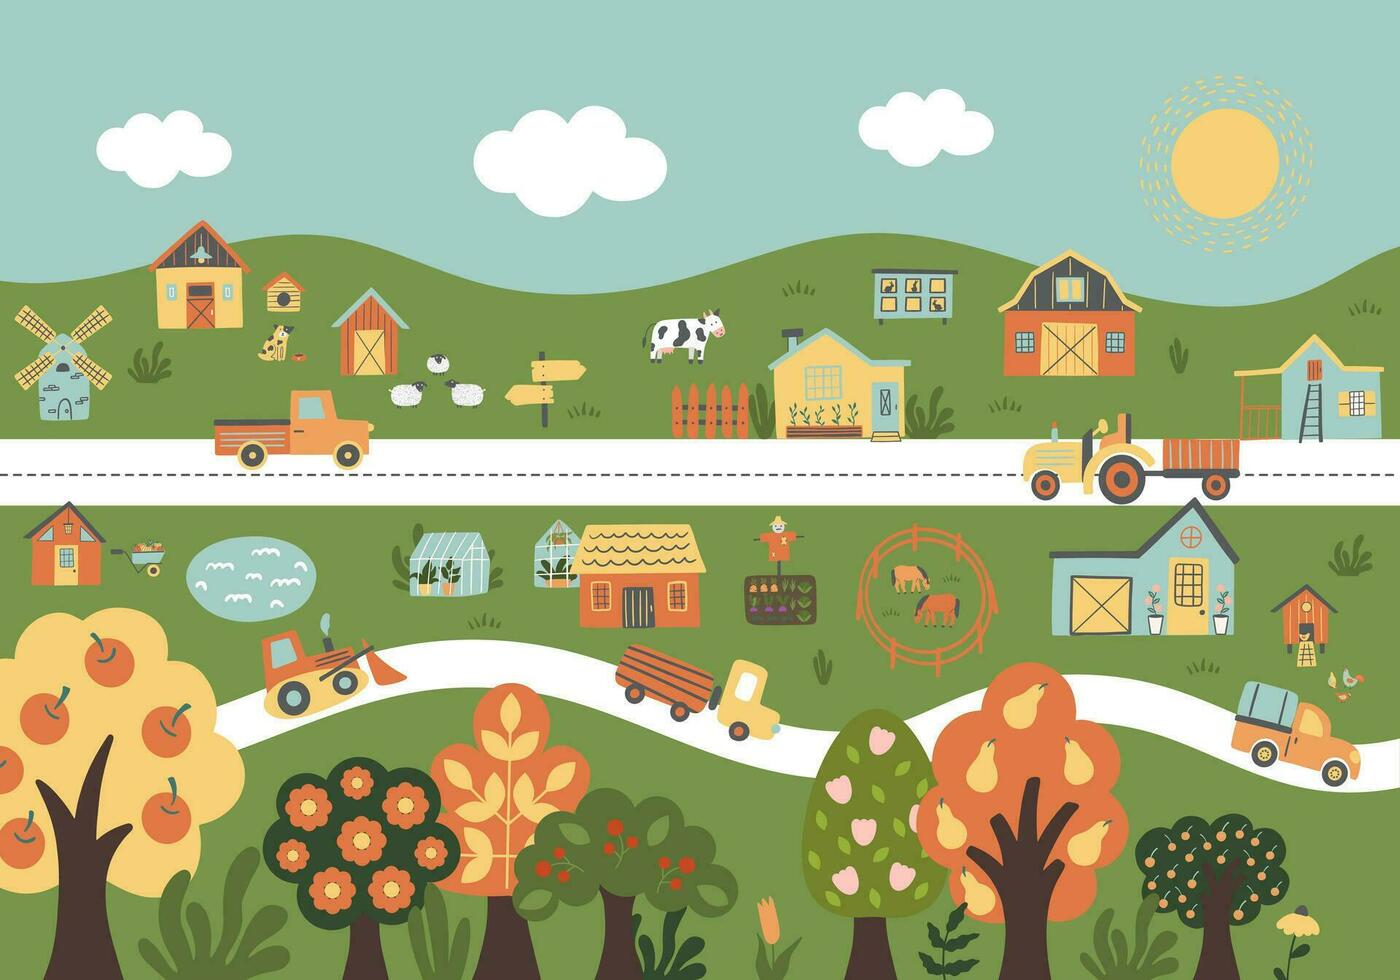 Farm wall poster with farmhouses,hills, animals, garden, trees, car, chicken coop. vector